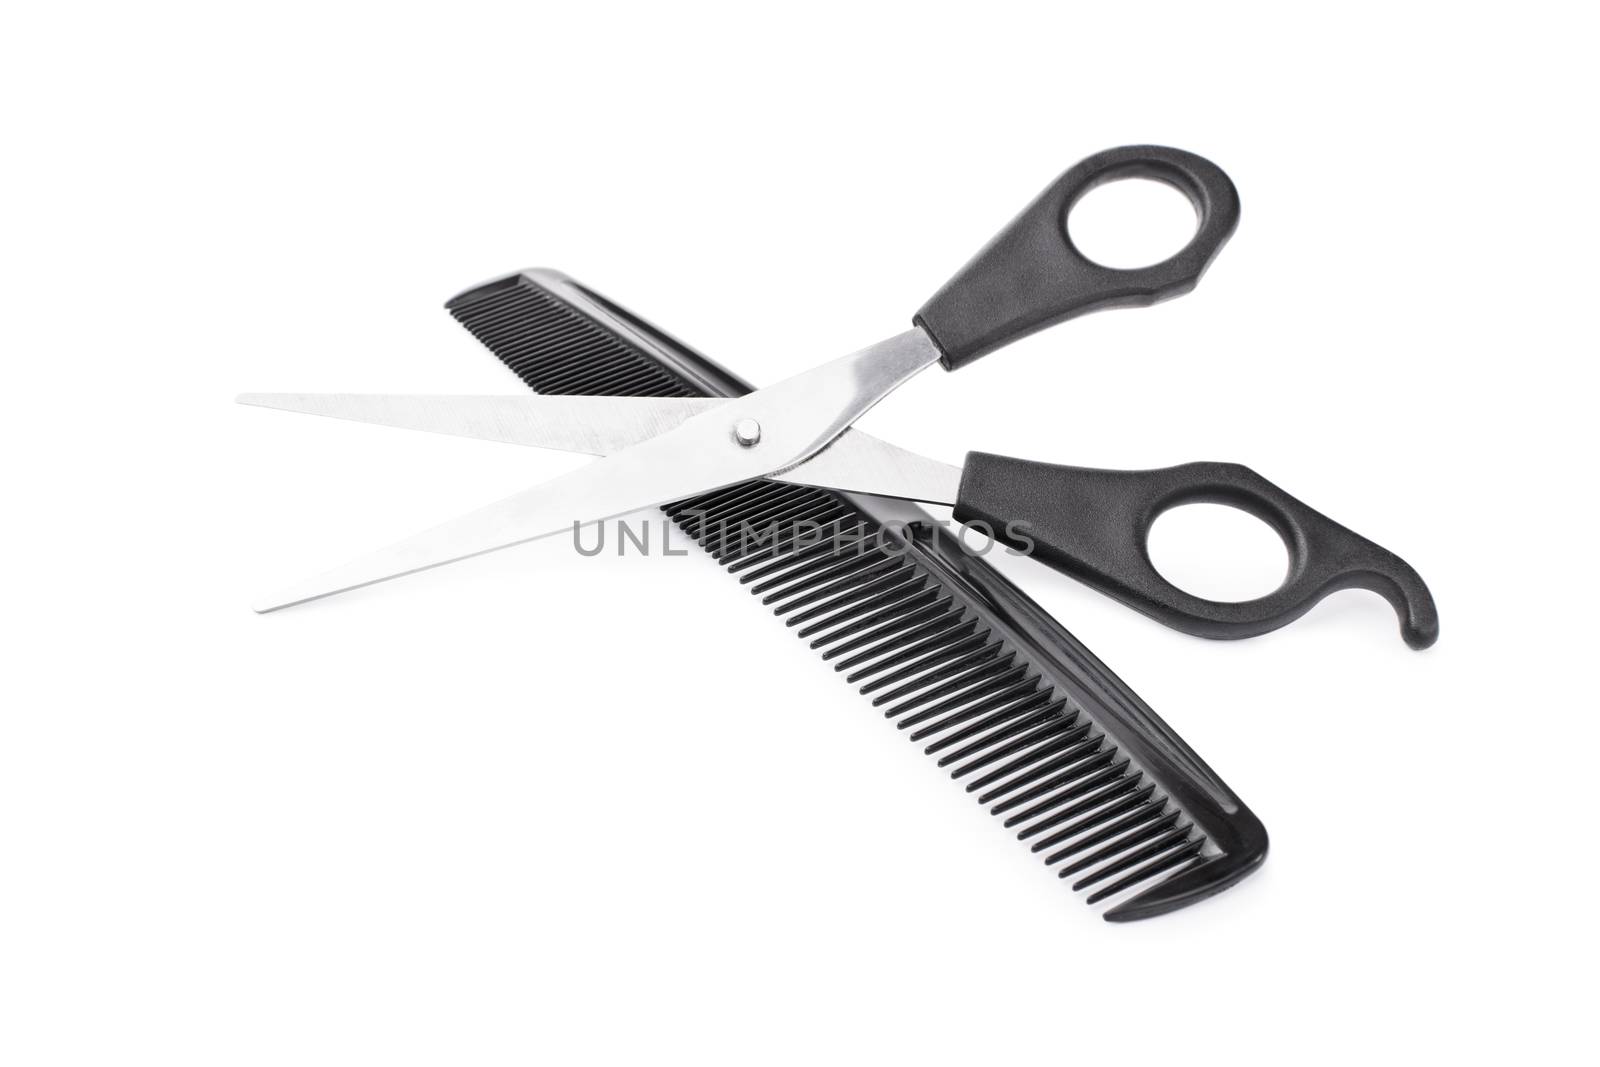 Scissors and comb by Mendelex